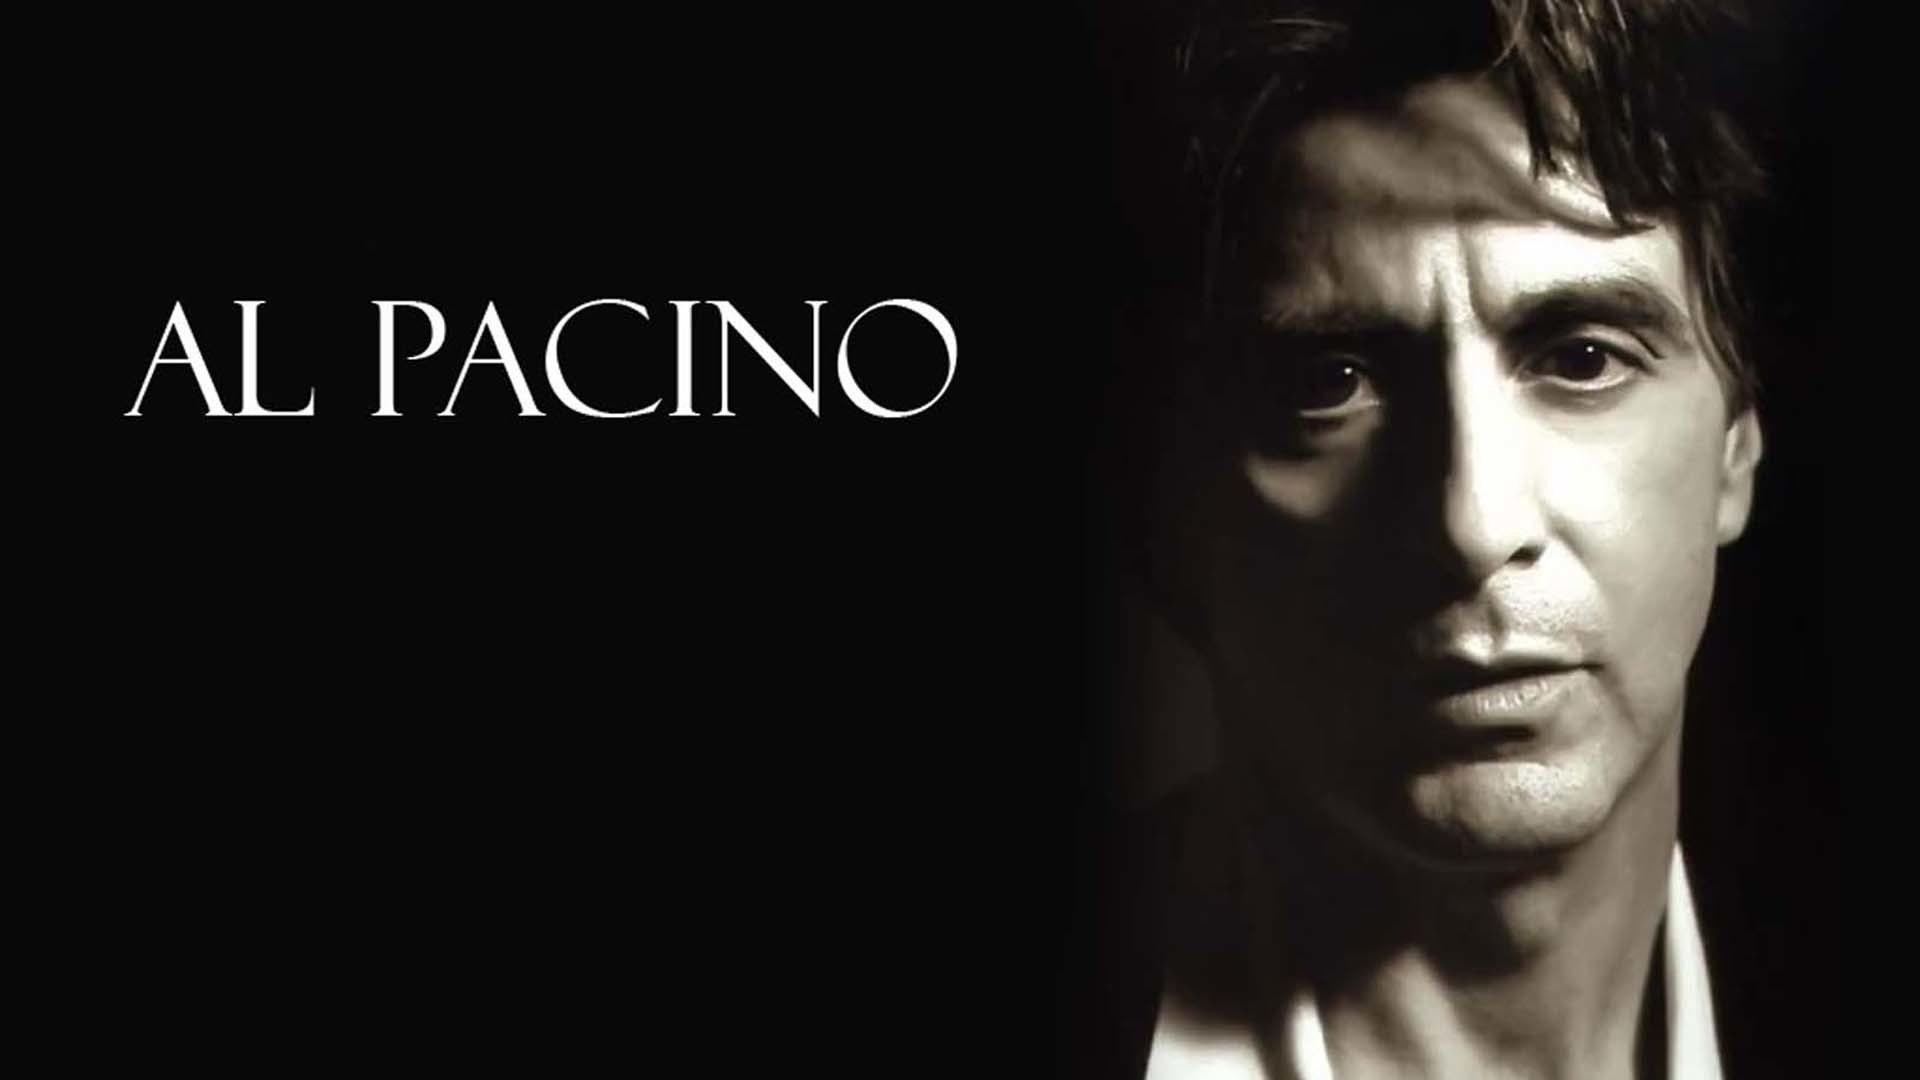 1920x1080 ... al pacino wallpapers high quality download free ...